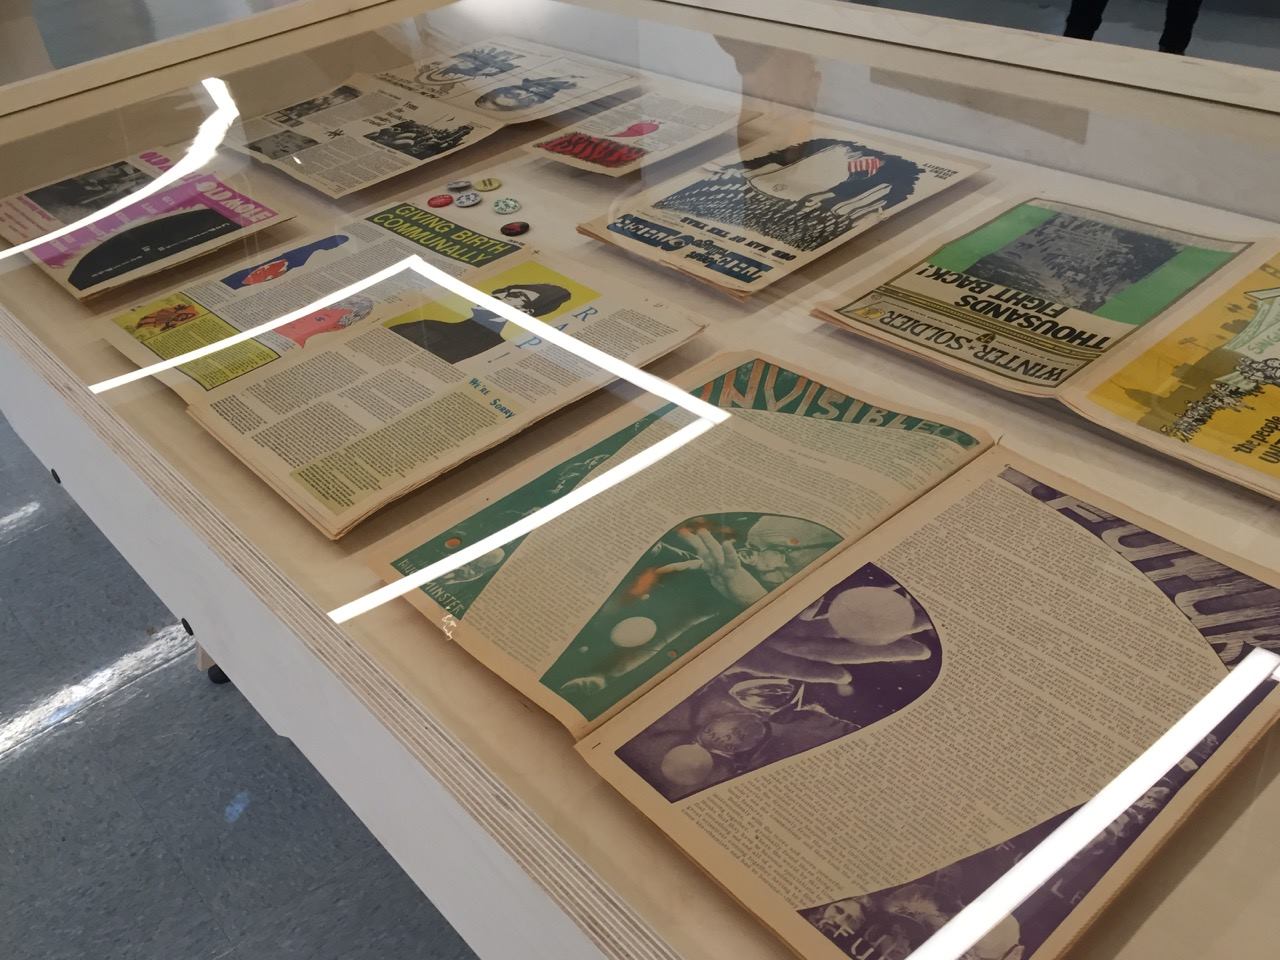 Counterculture newspapers on display as part of the Revolution Times exhibit. 